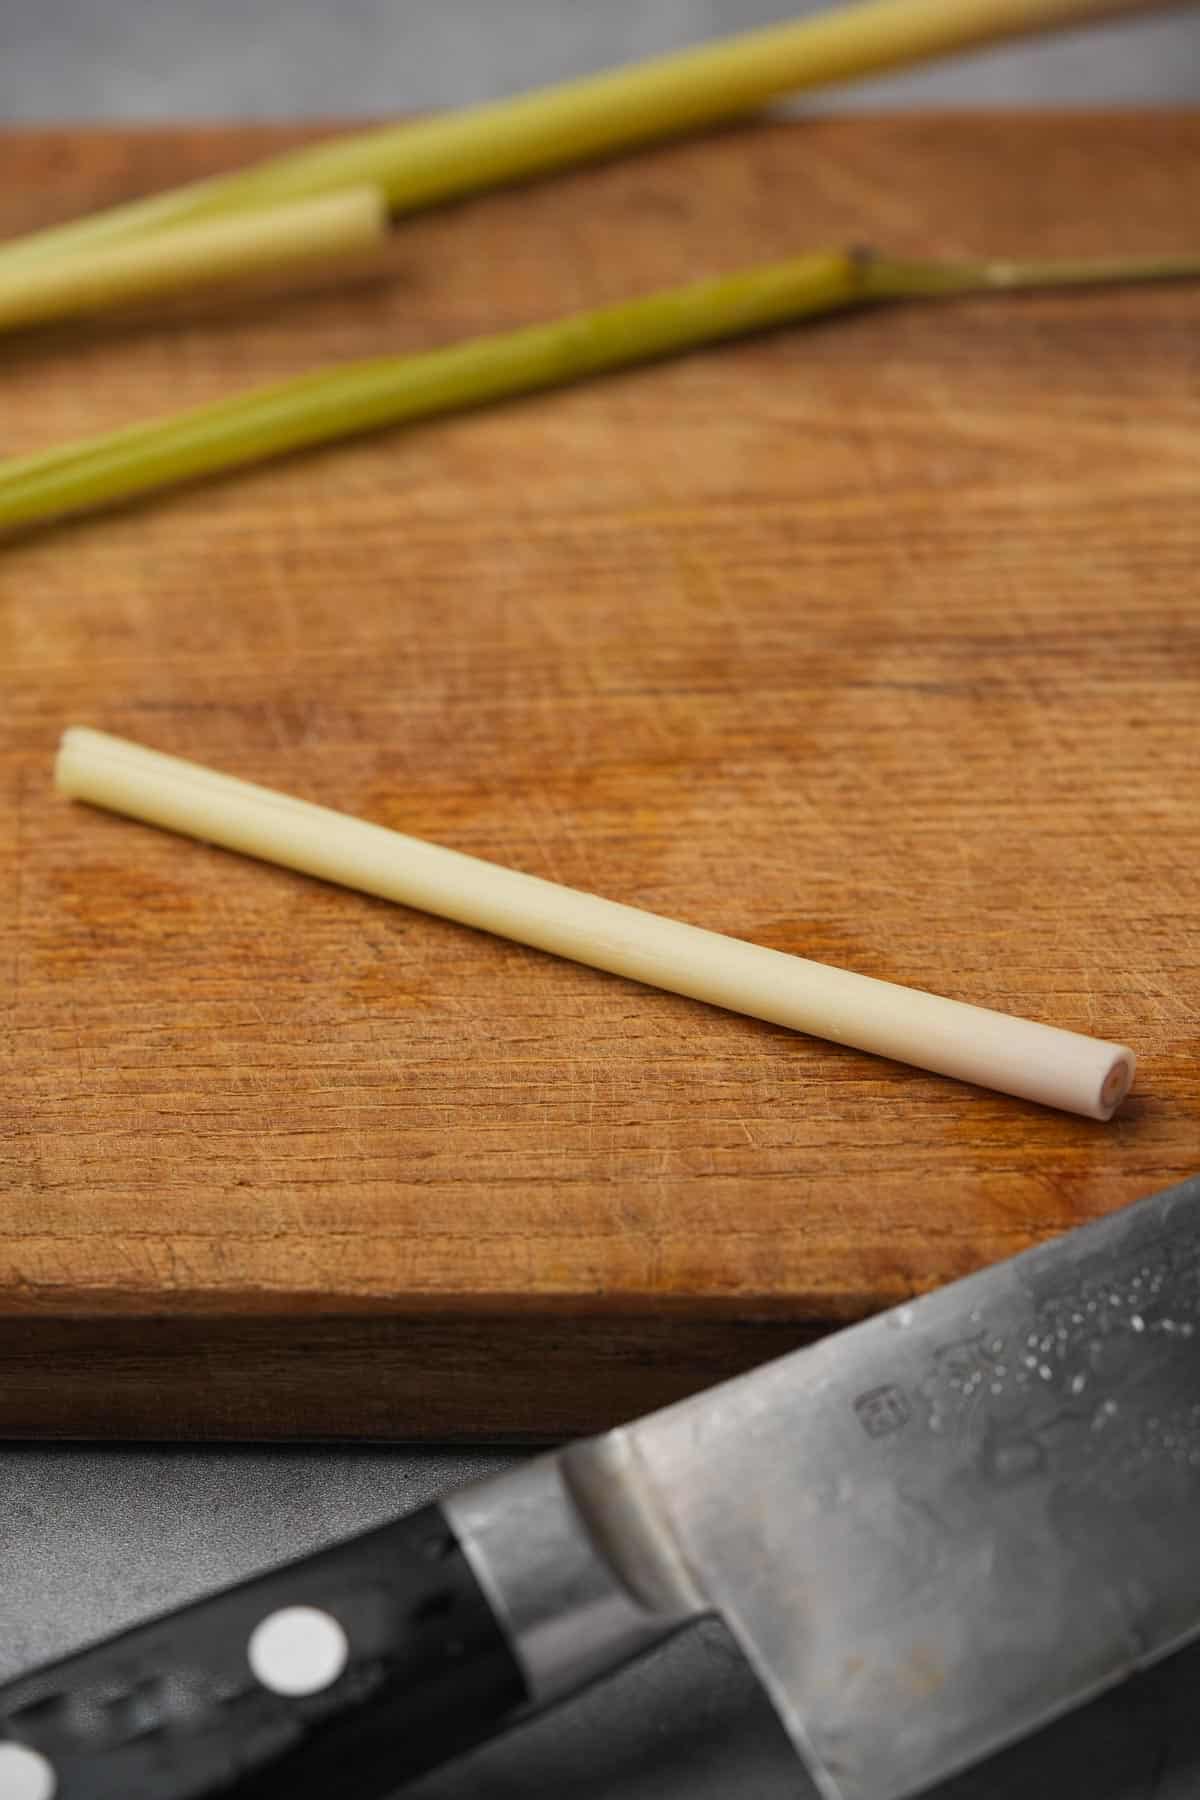 A knife and a stick of lemon grass on a cutting board.